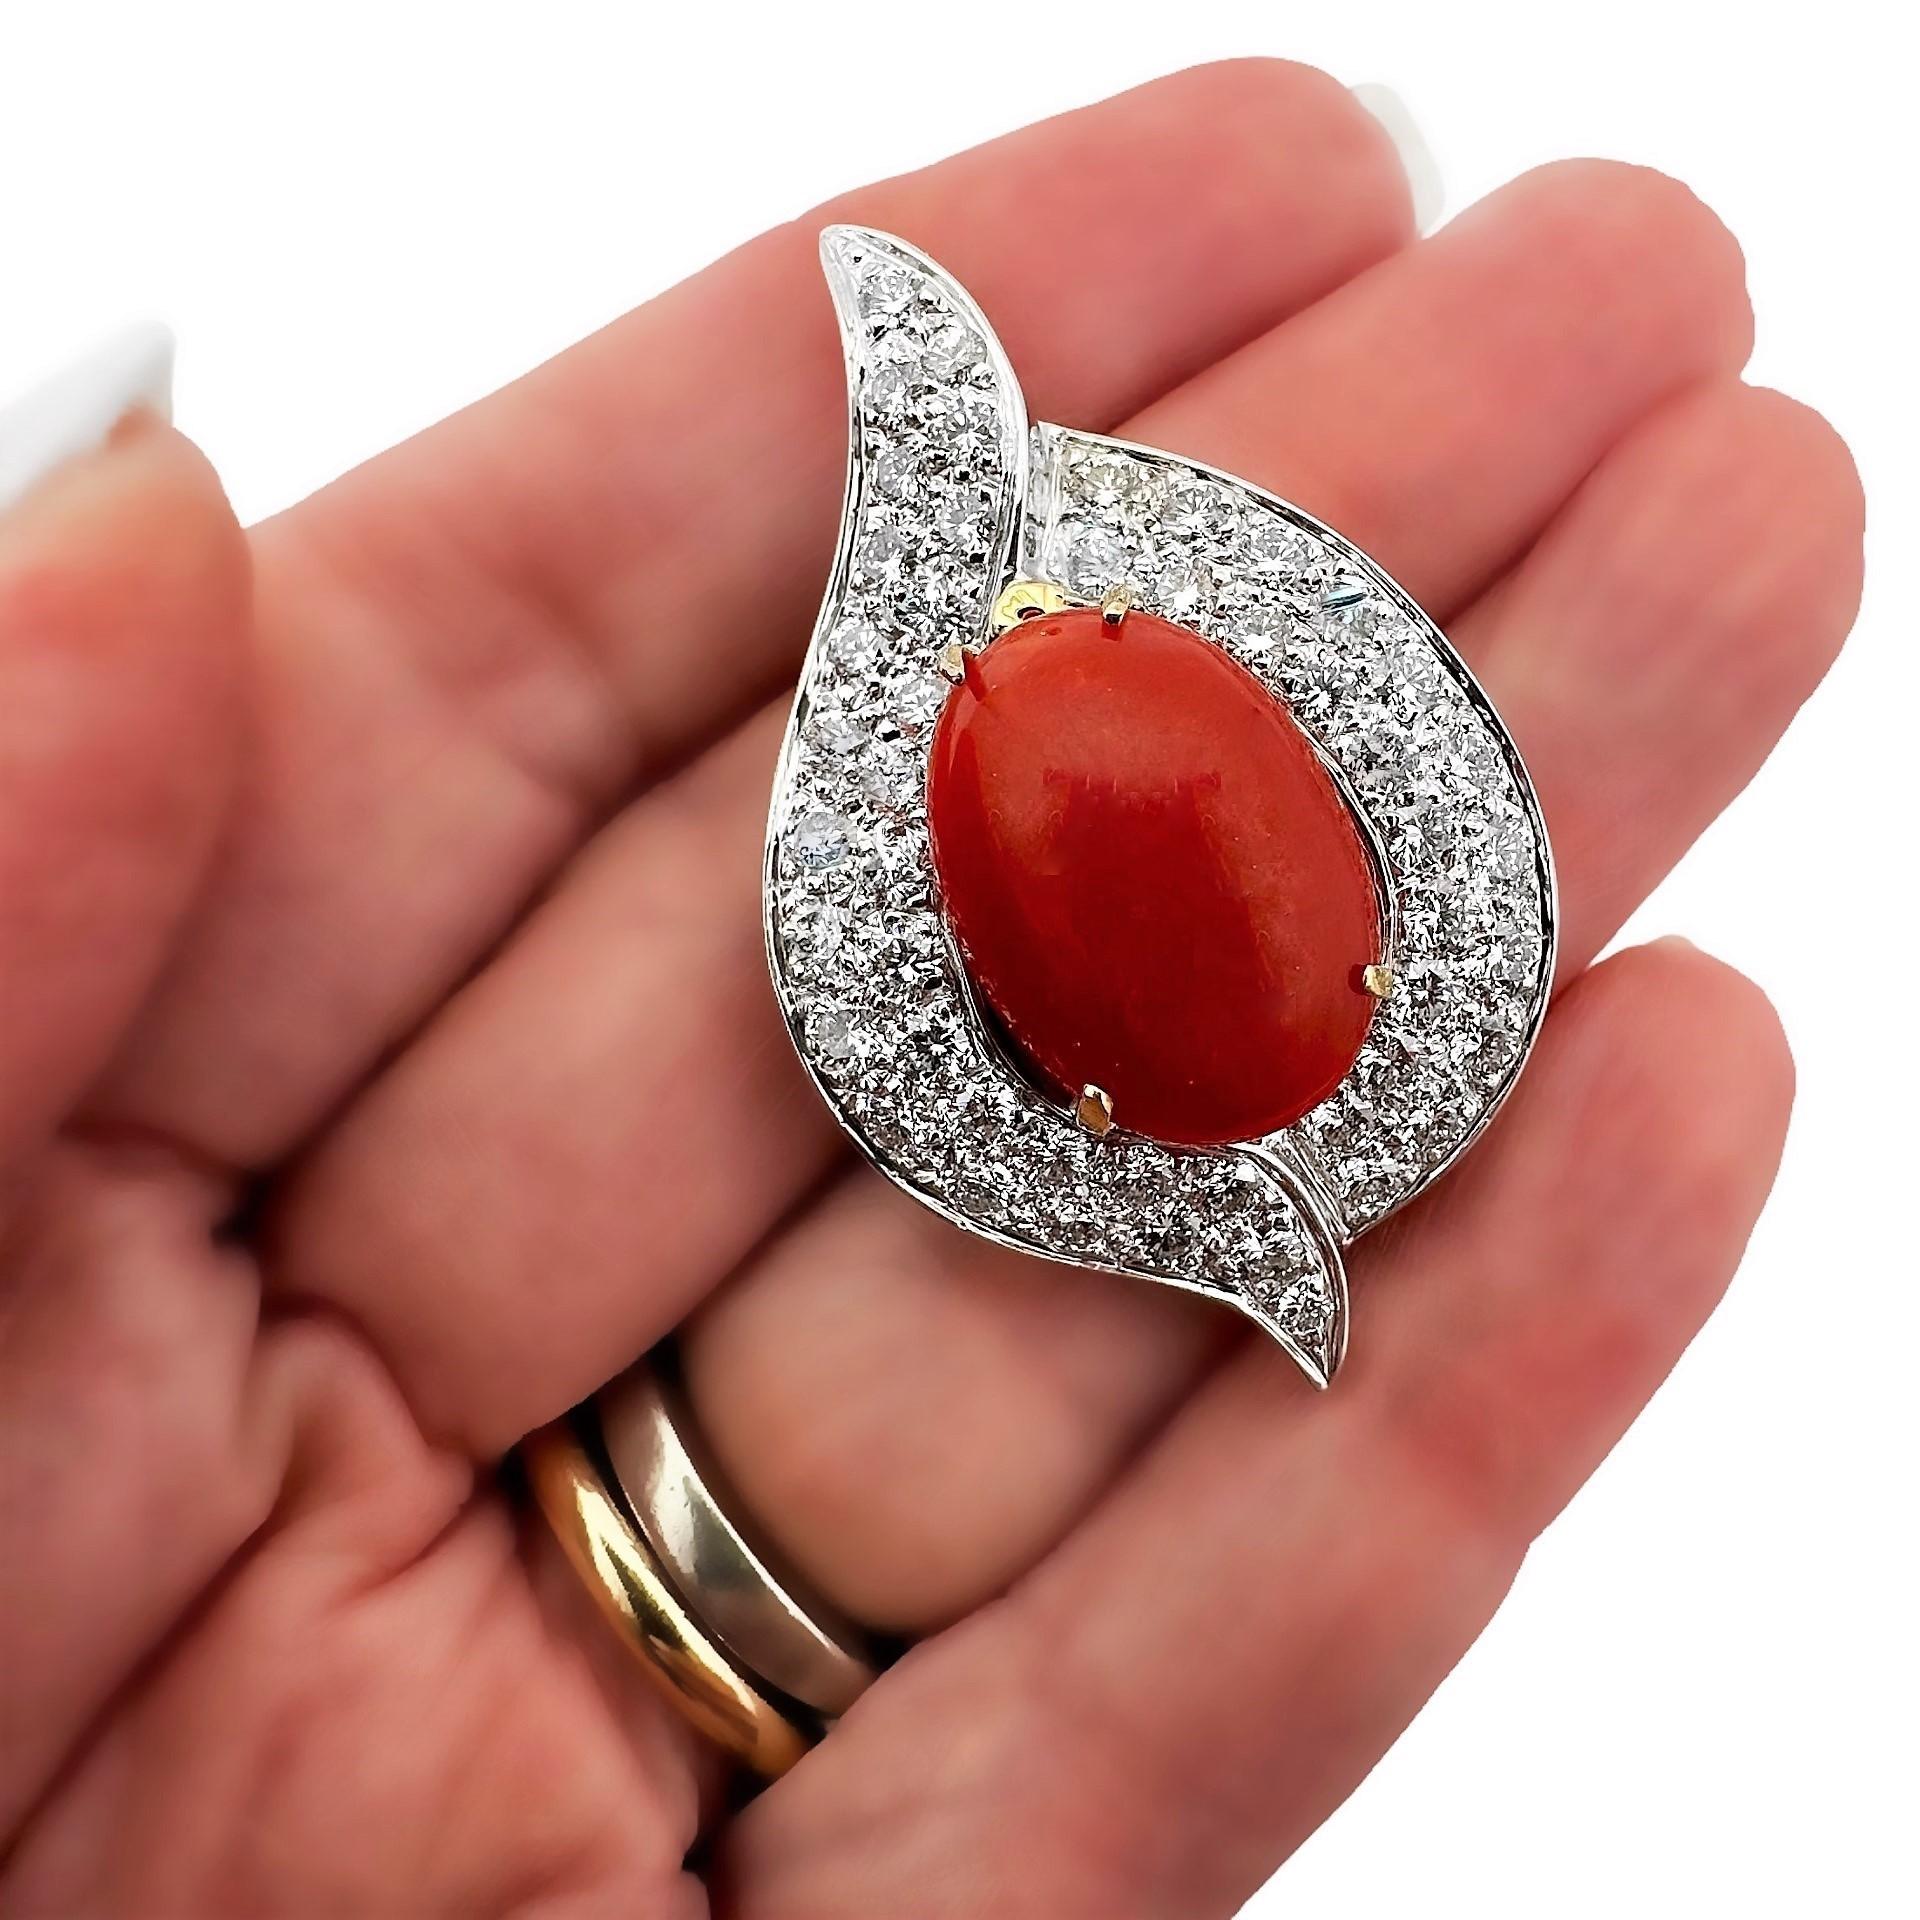 Dramatic 18k Coral & Diamond Pendant By Emis Beros Shown on an Omega Choker For Sale 3